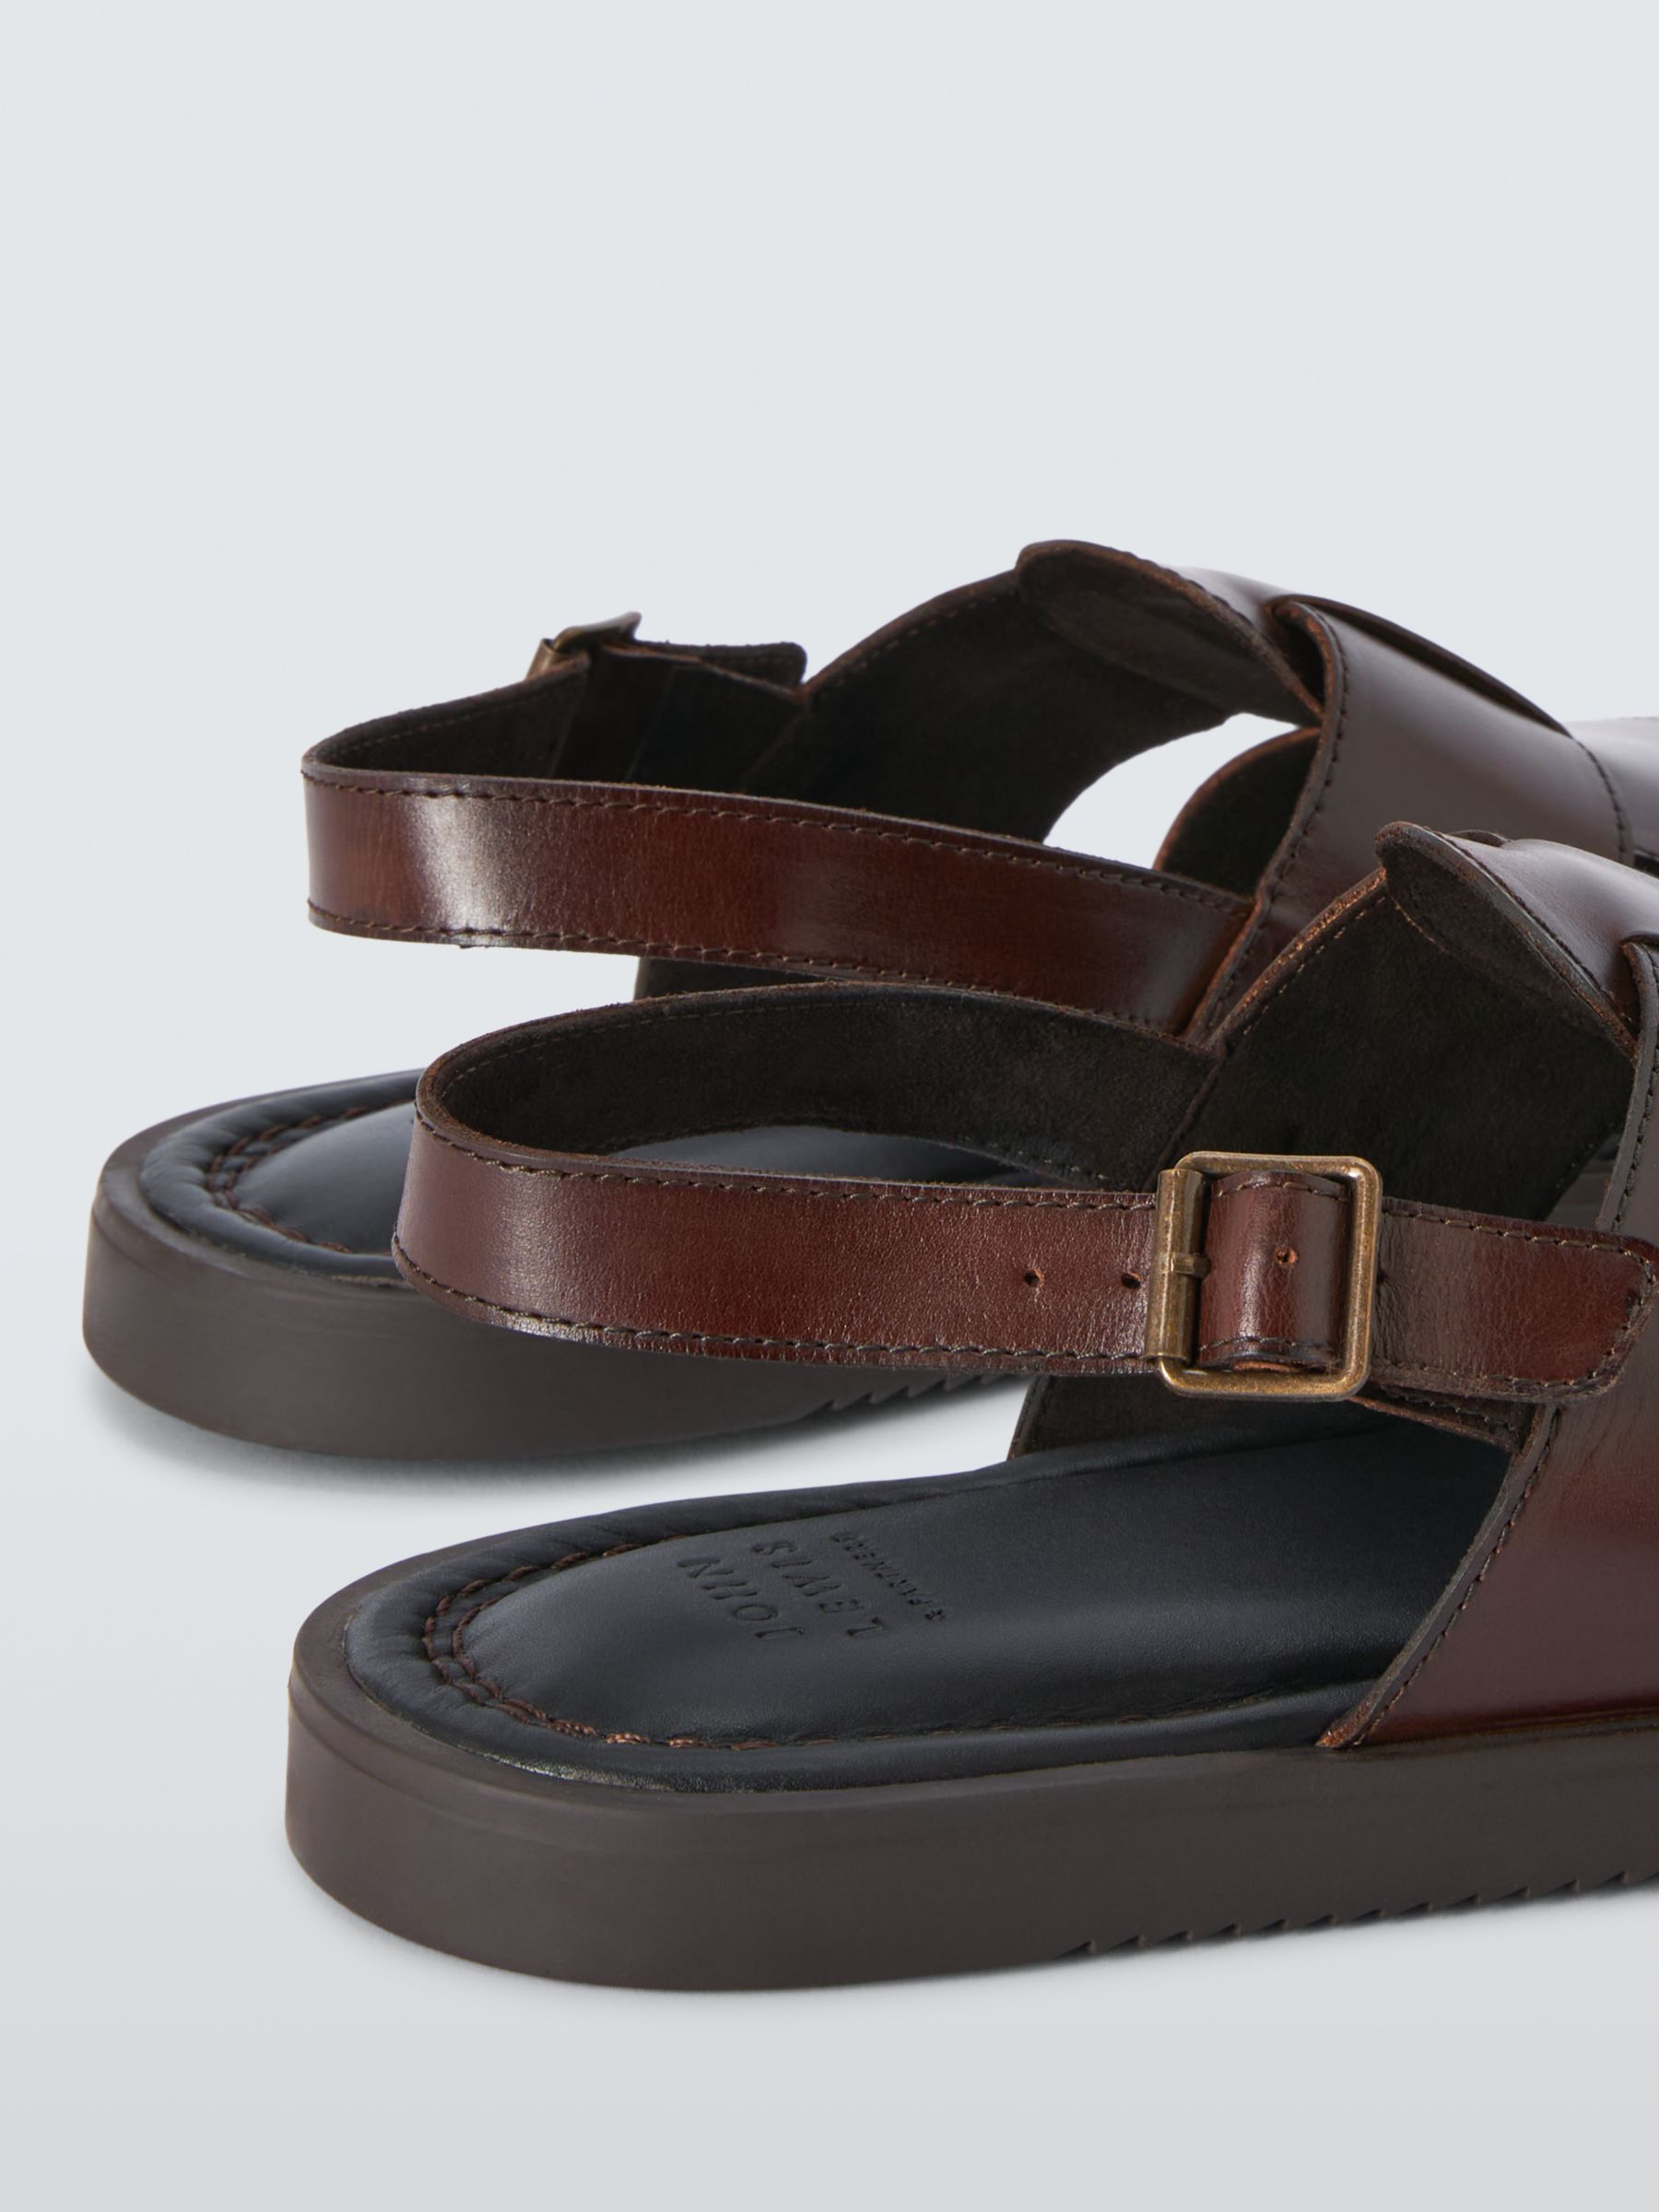 John Lewis Leather Double Strap Sandals, Brown, 7